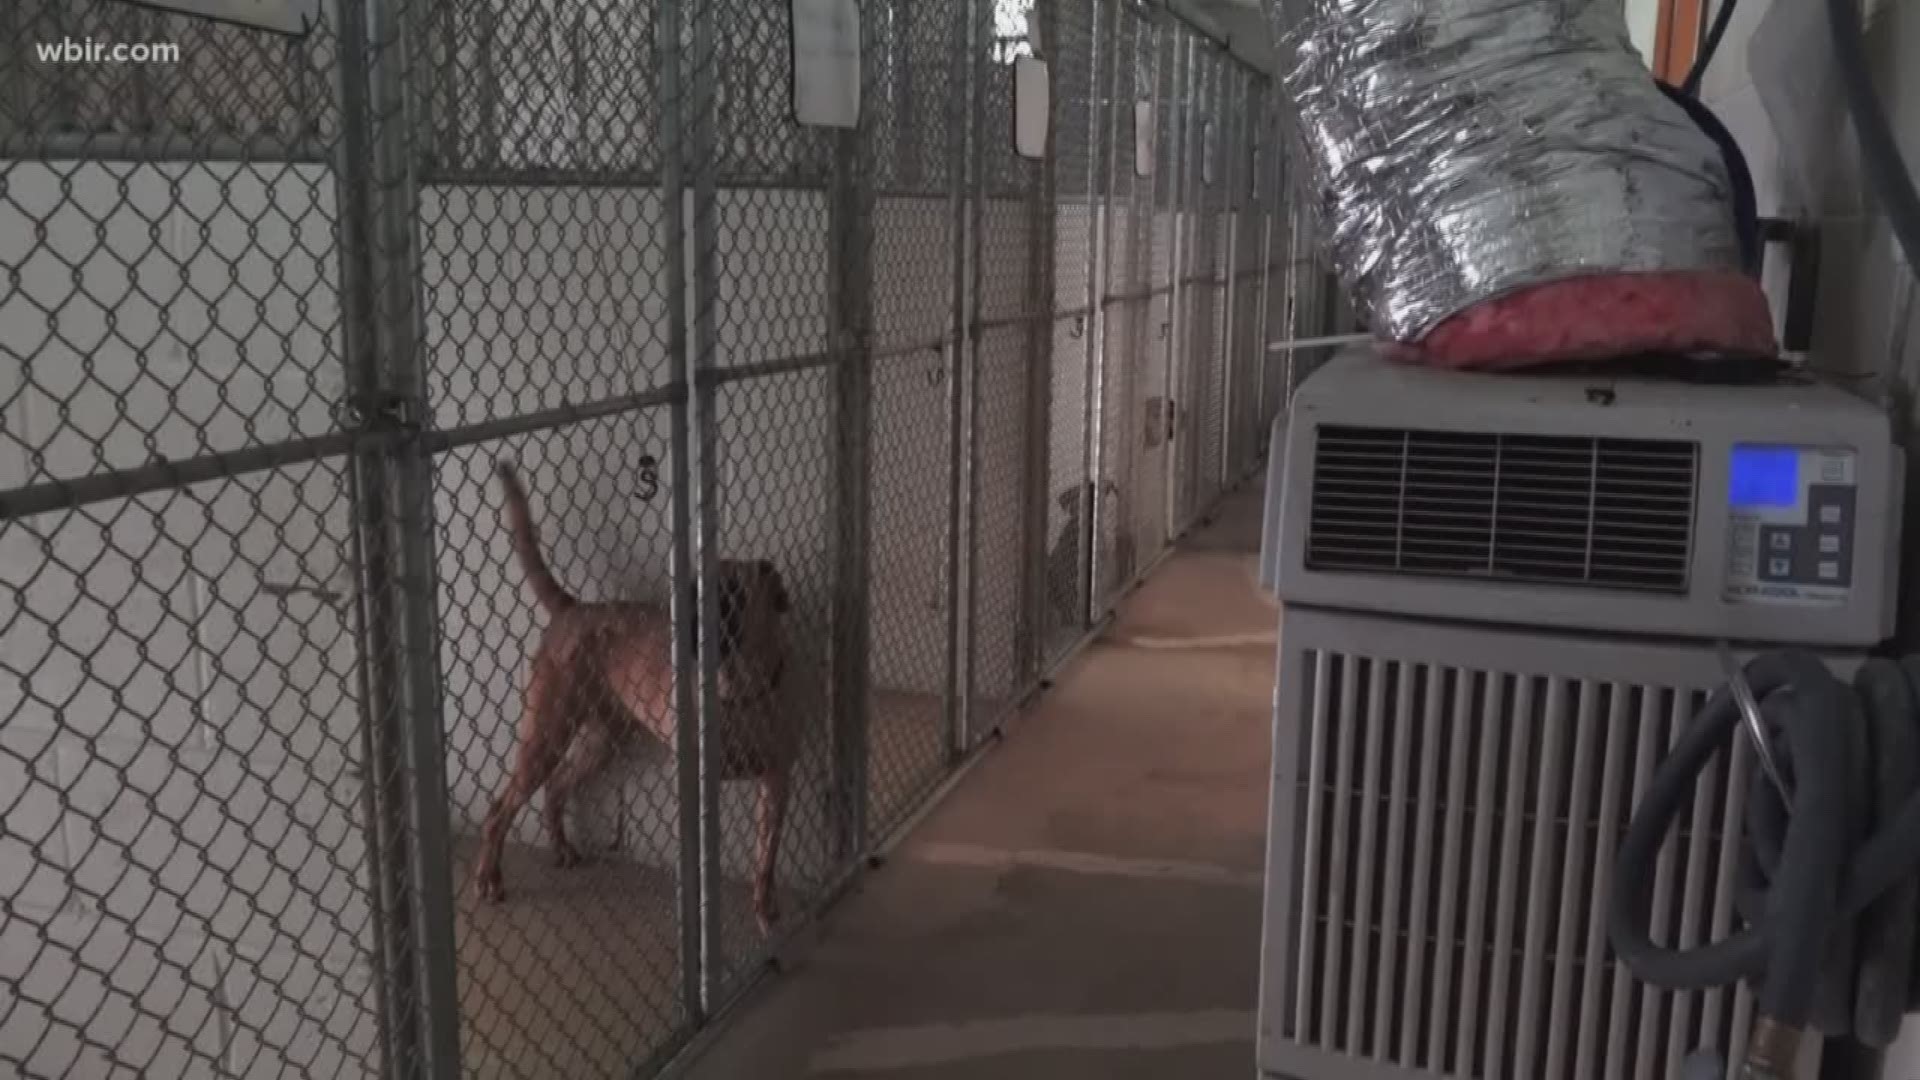 Four days after the air conditioning unit at the Campbell County Animal Shelter broke and sent staff scrambling to get at-risk animals in a safe environment, donated units are making the shelter inhabitable.